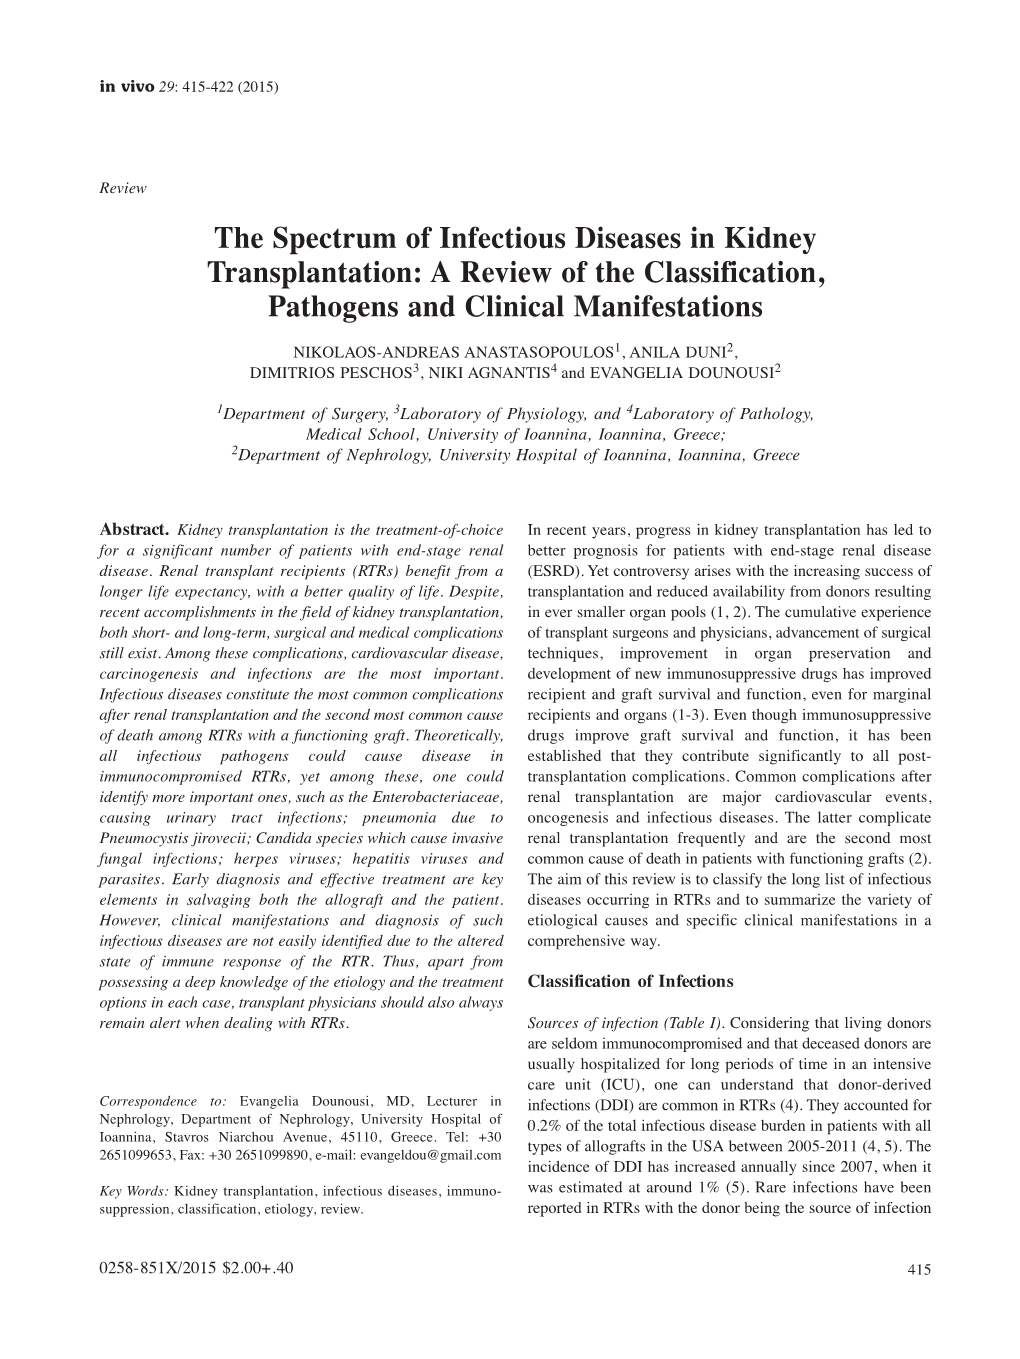 The Spectrum of Infectious Diseases in Kidney Transplantation: a Review of the Classification, Pathogens and Clinical Manifestations